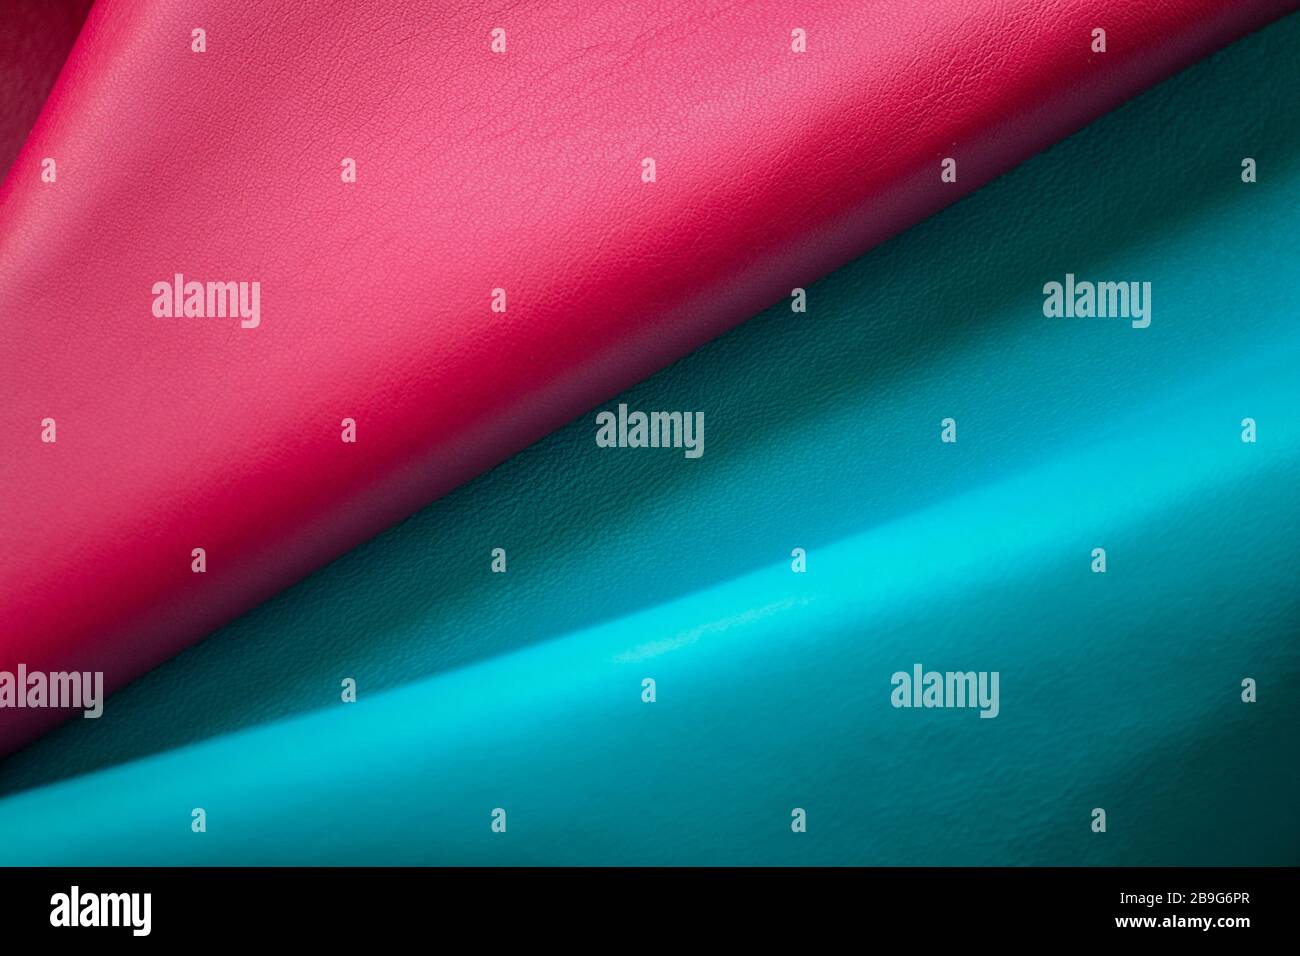 Pink and blue soft leather texture background Stock Photo